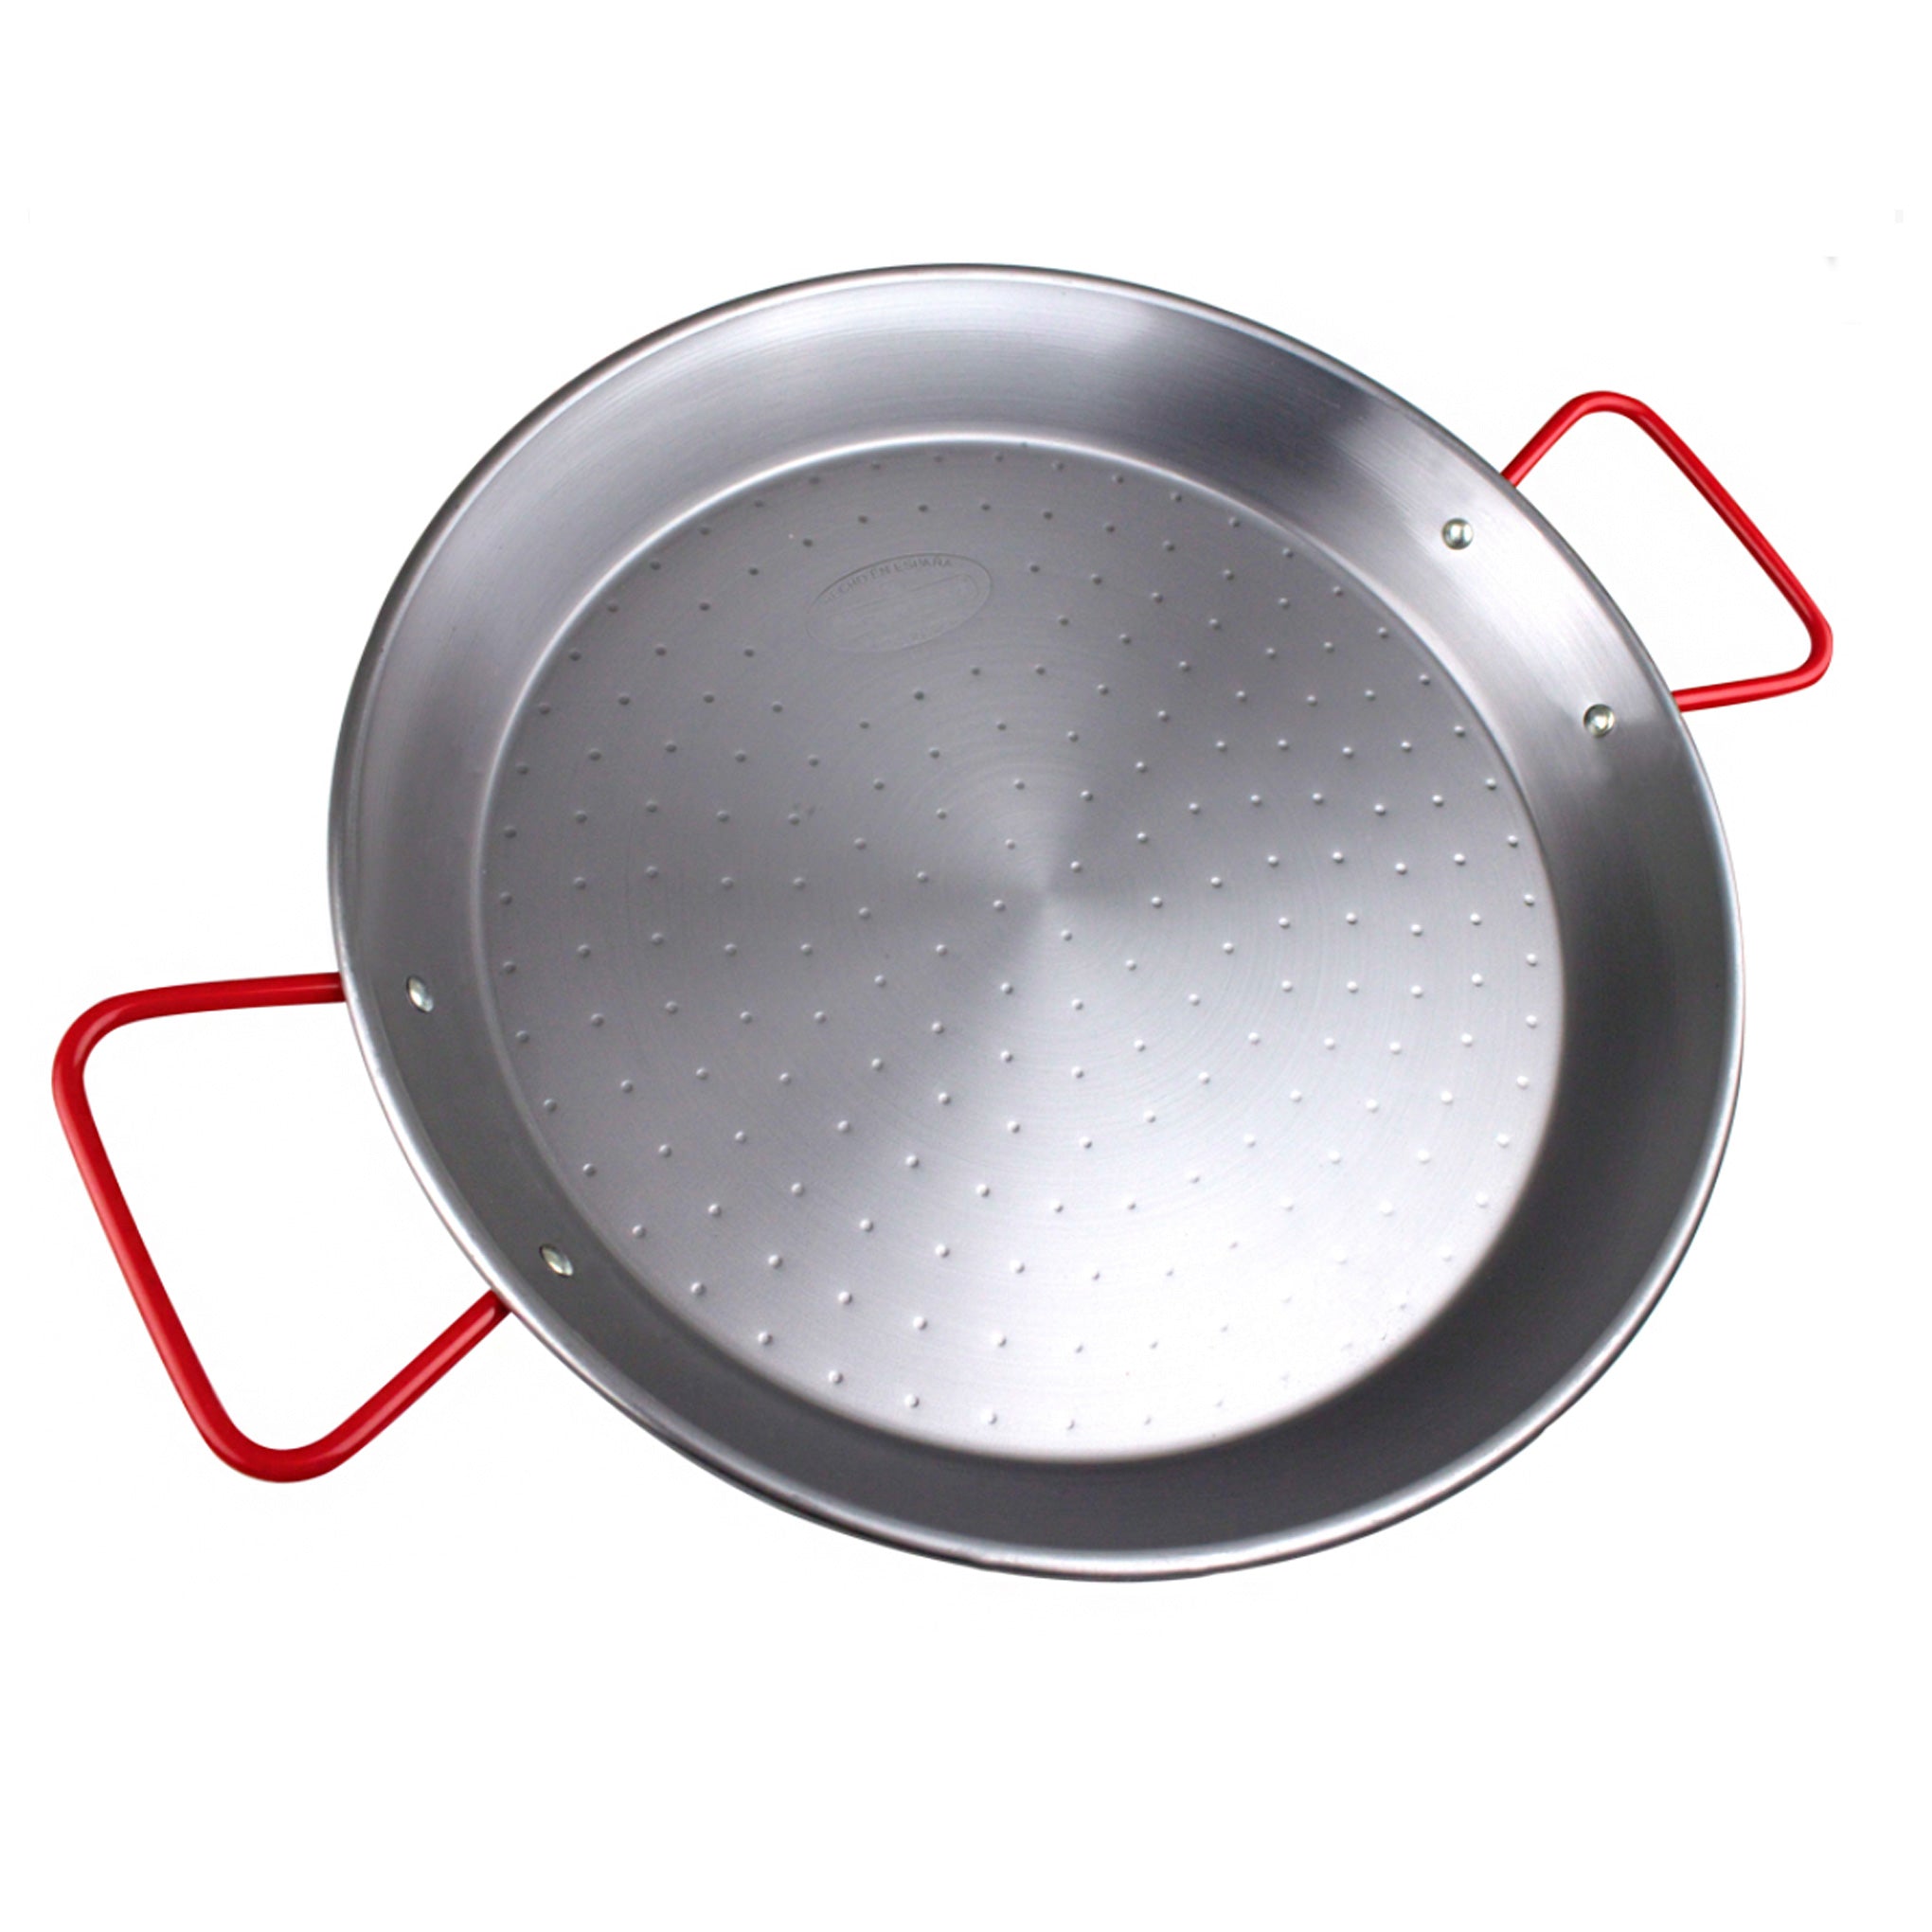 32 Inch Carbon Steel Paella Pan, 40 person